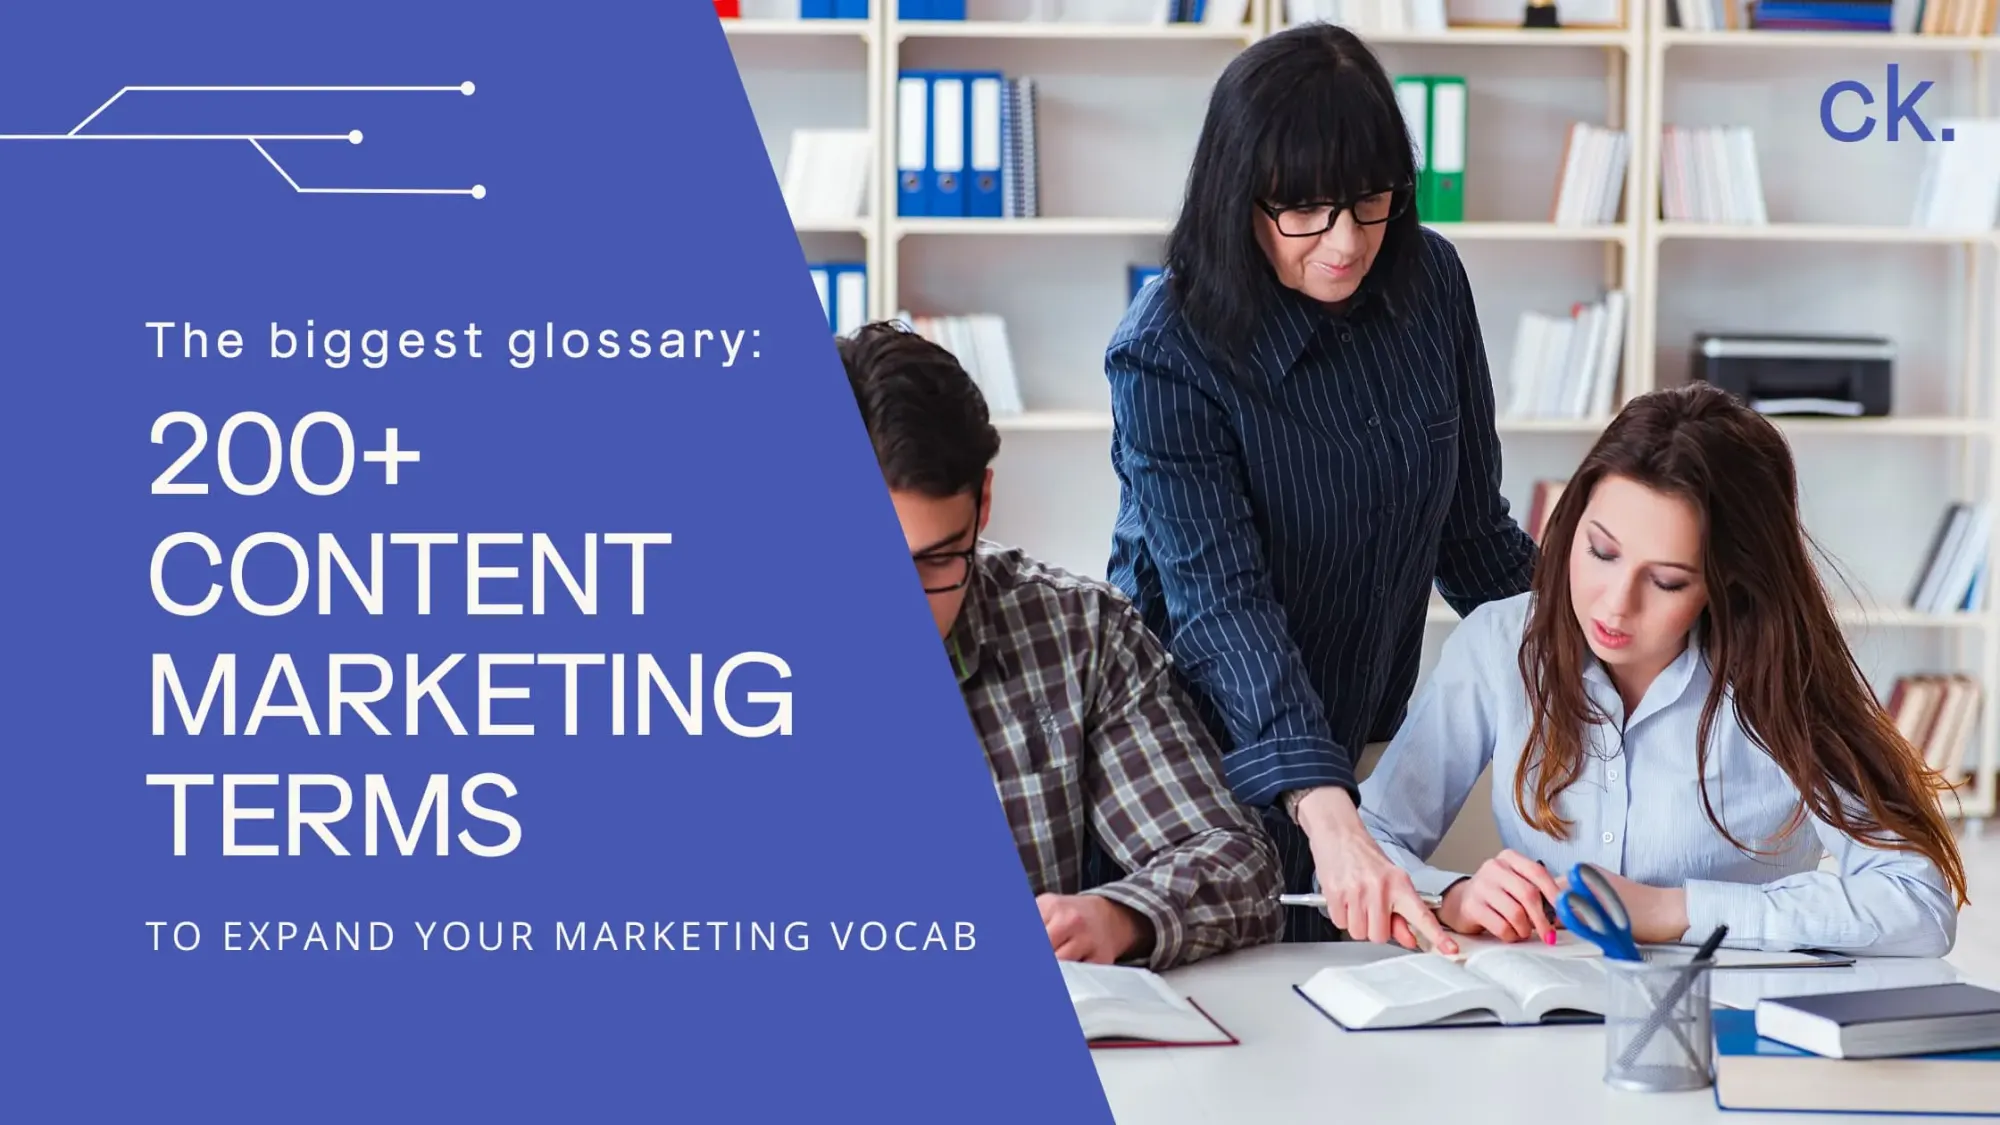 "The Definitive Content Marketing Glossary: 200+ terms to Understand Content Marketing